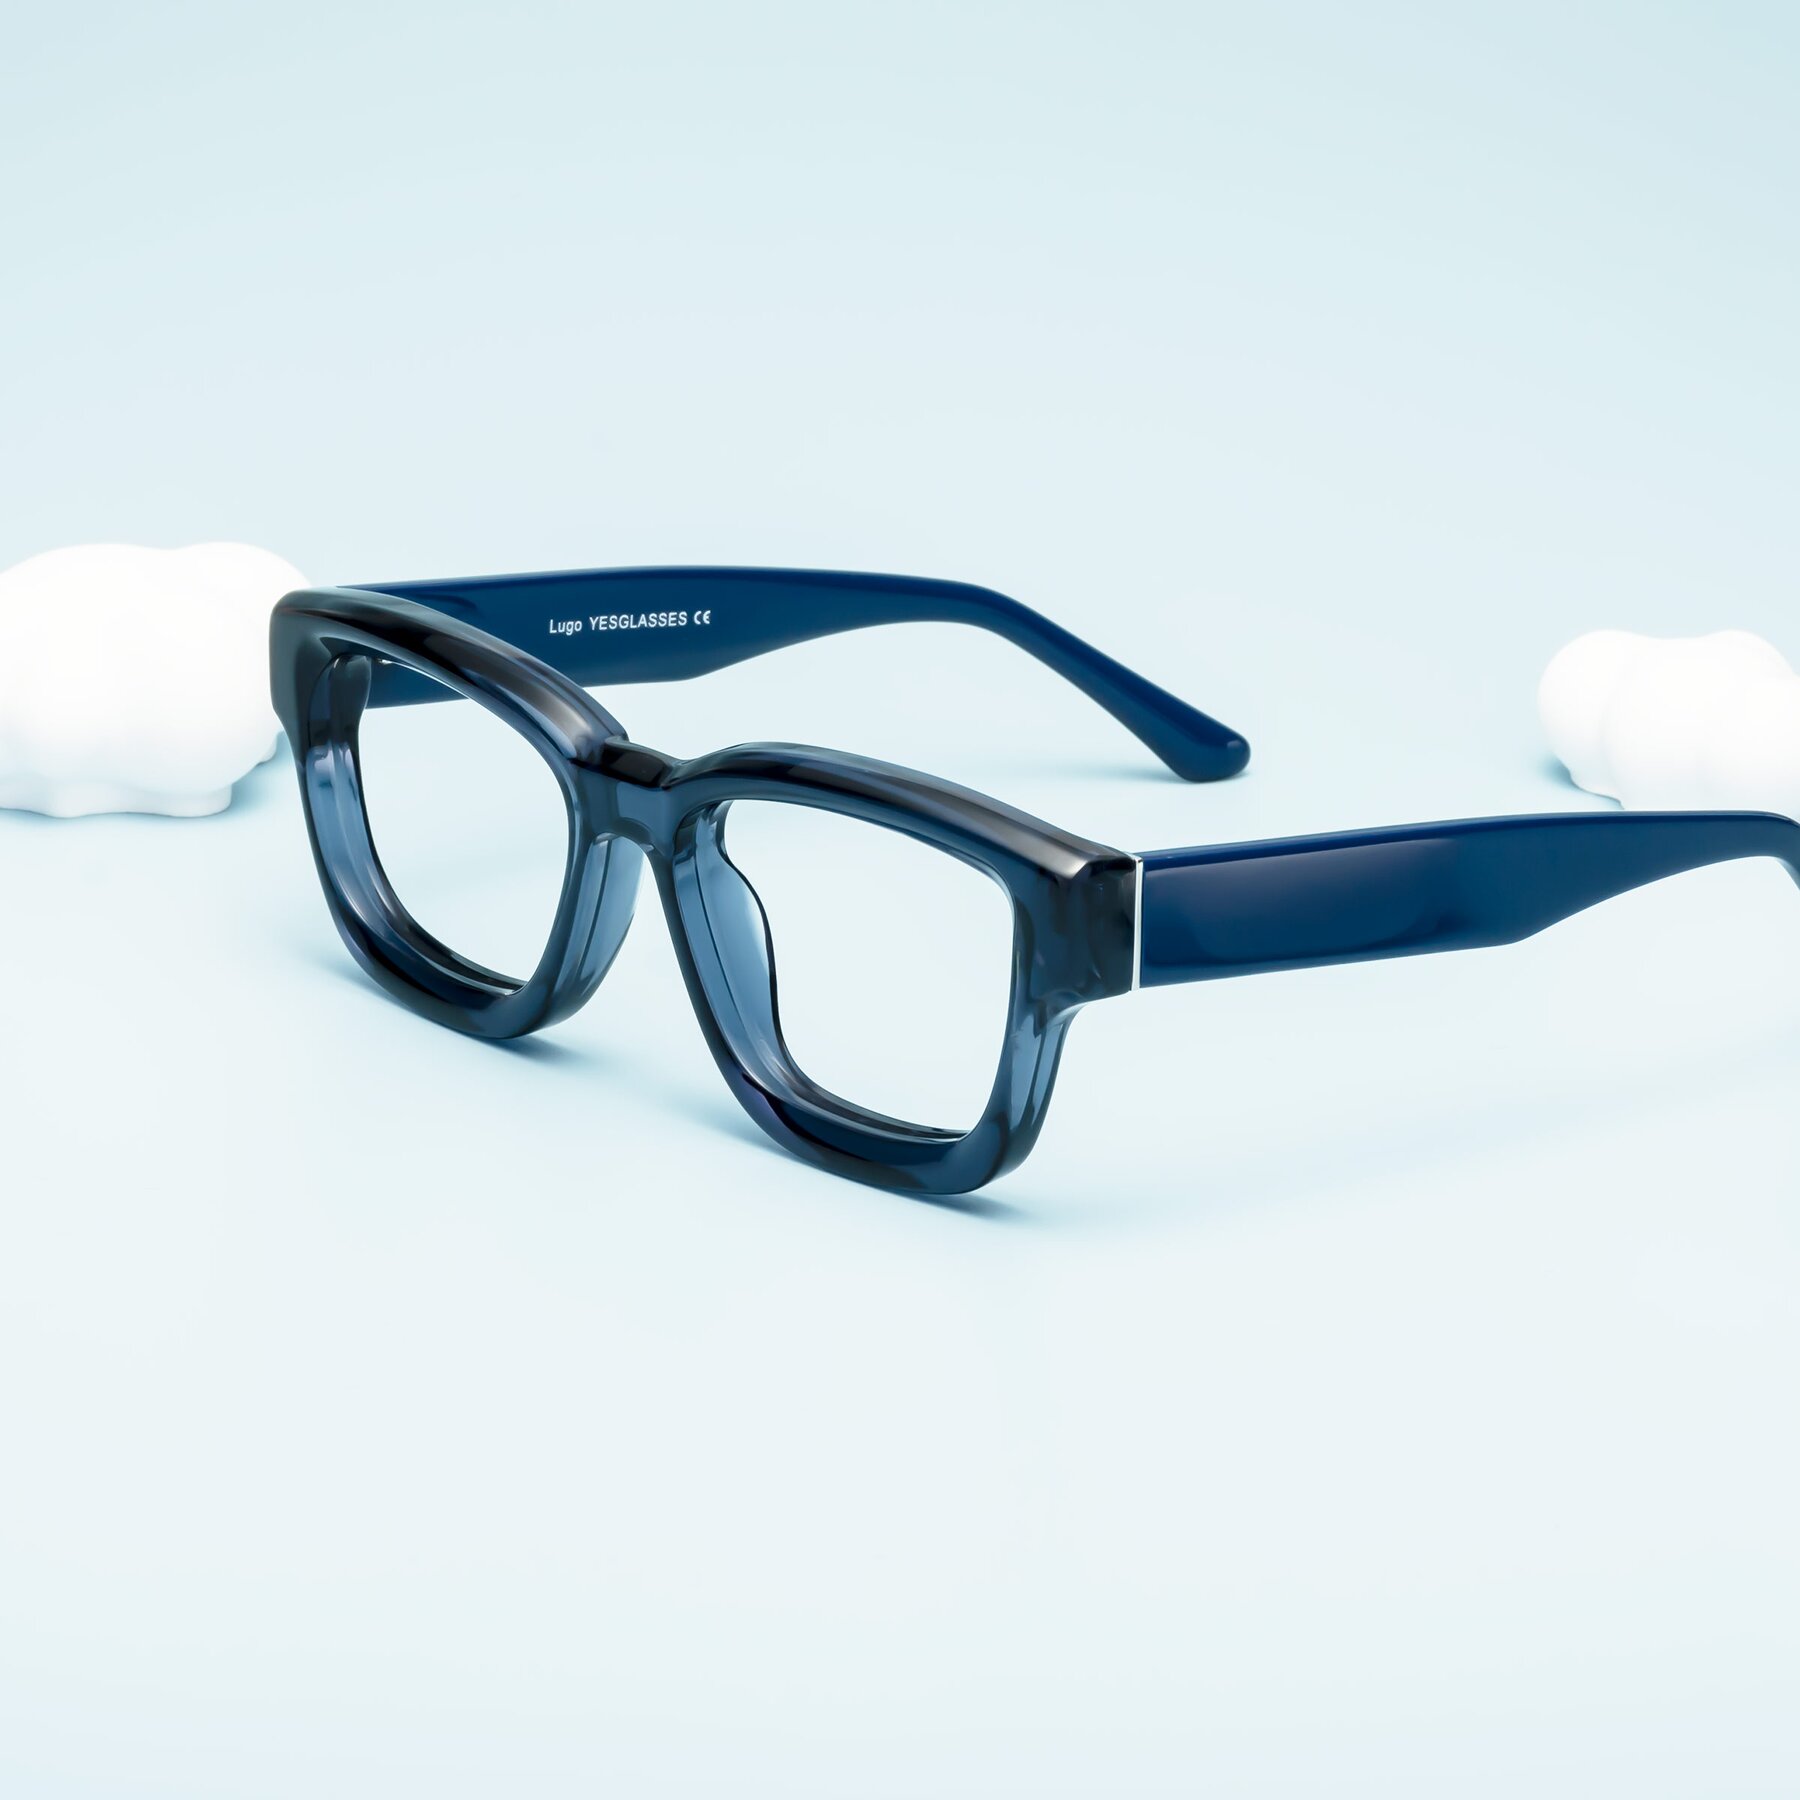 Lifestyle photography #1 of Lugo in Translucent Blue with Clear Reading Eyeglass Lenses